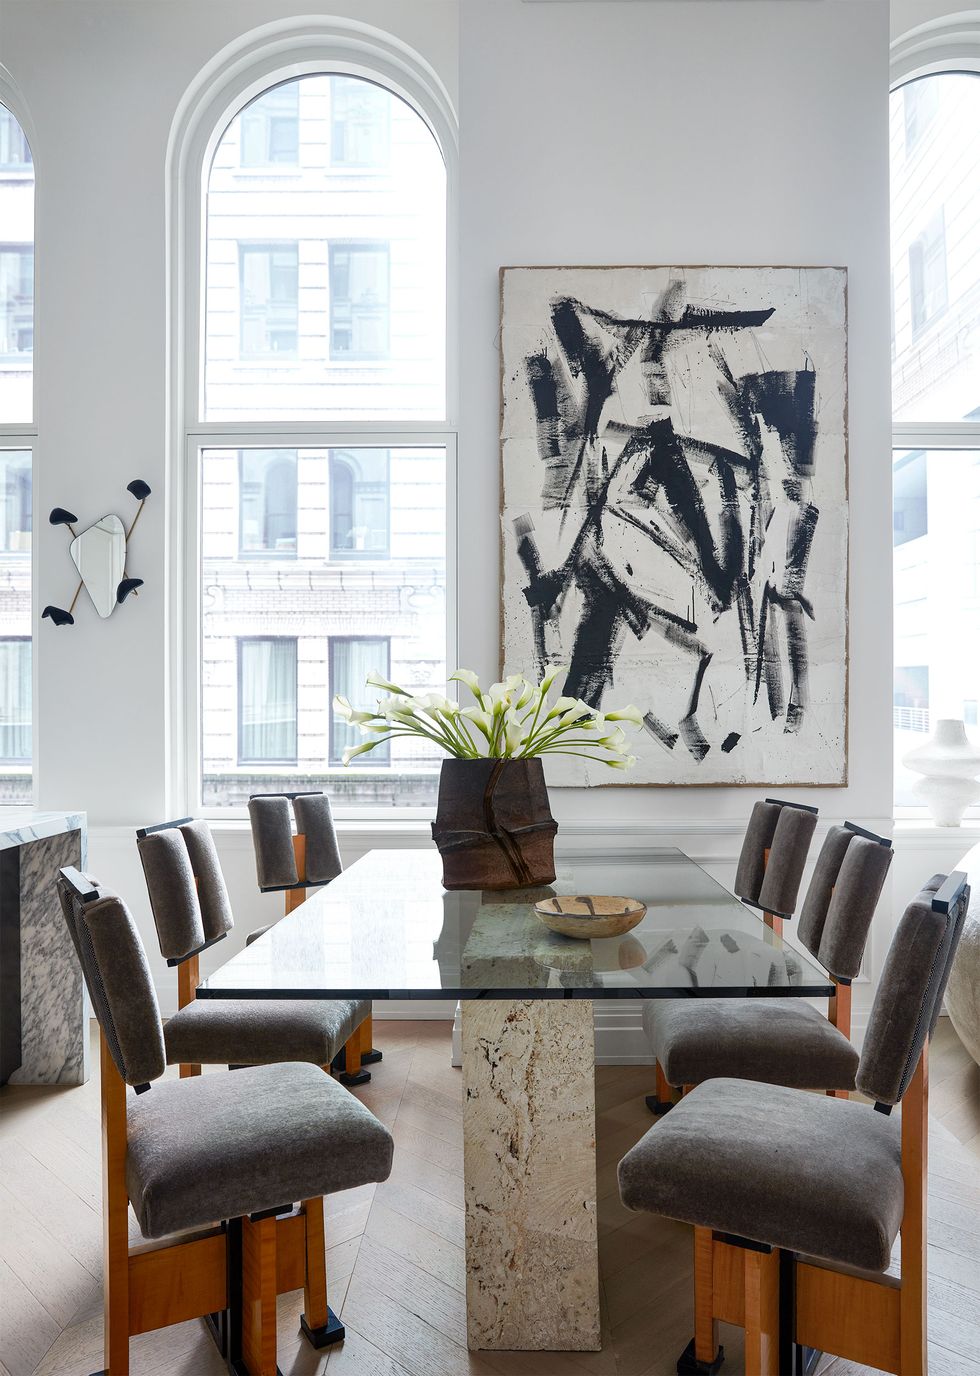 a room with a marble pedestal base table and gray suede chairs with wood frames and a black and white abstract painting on the far wall next to window